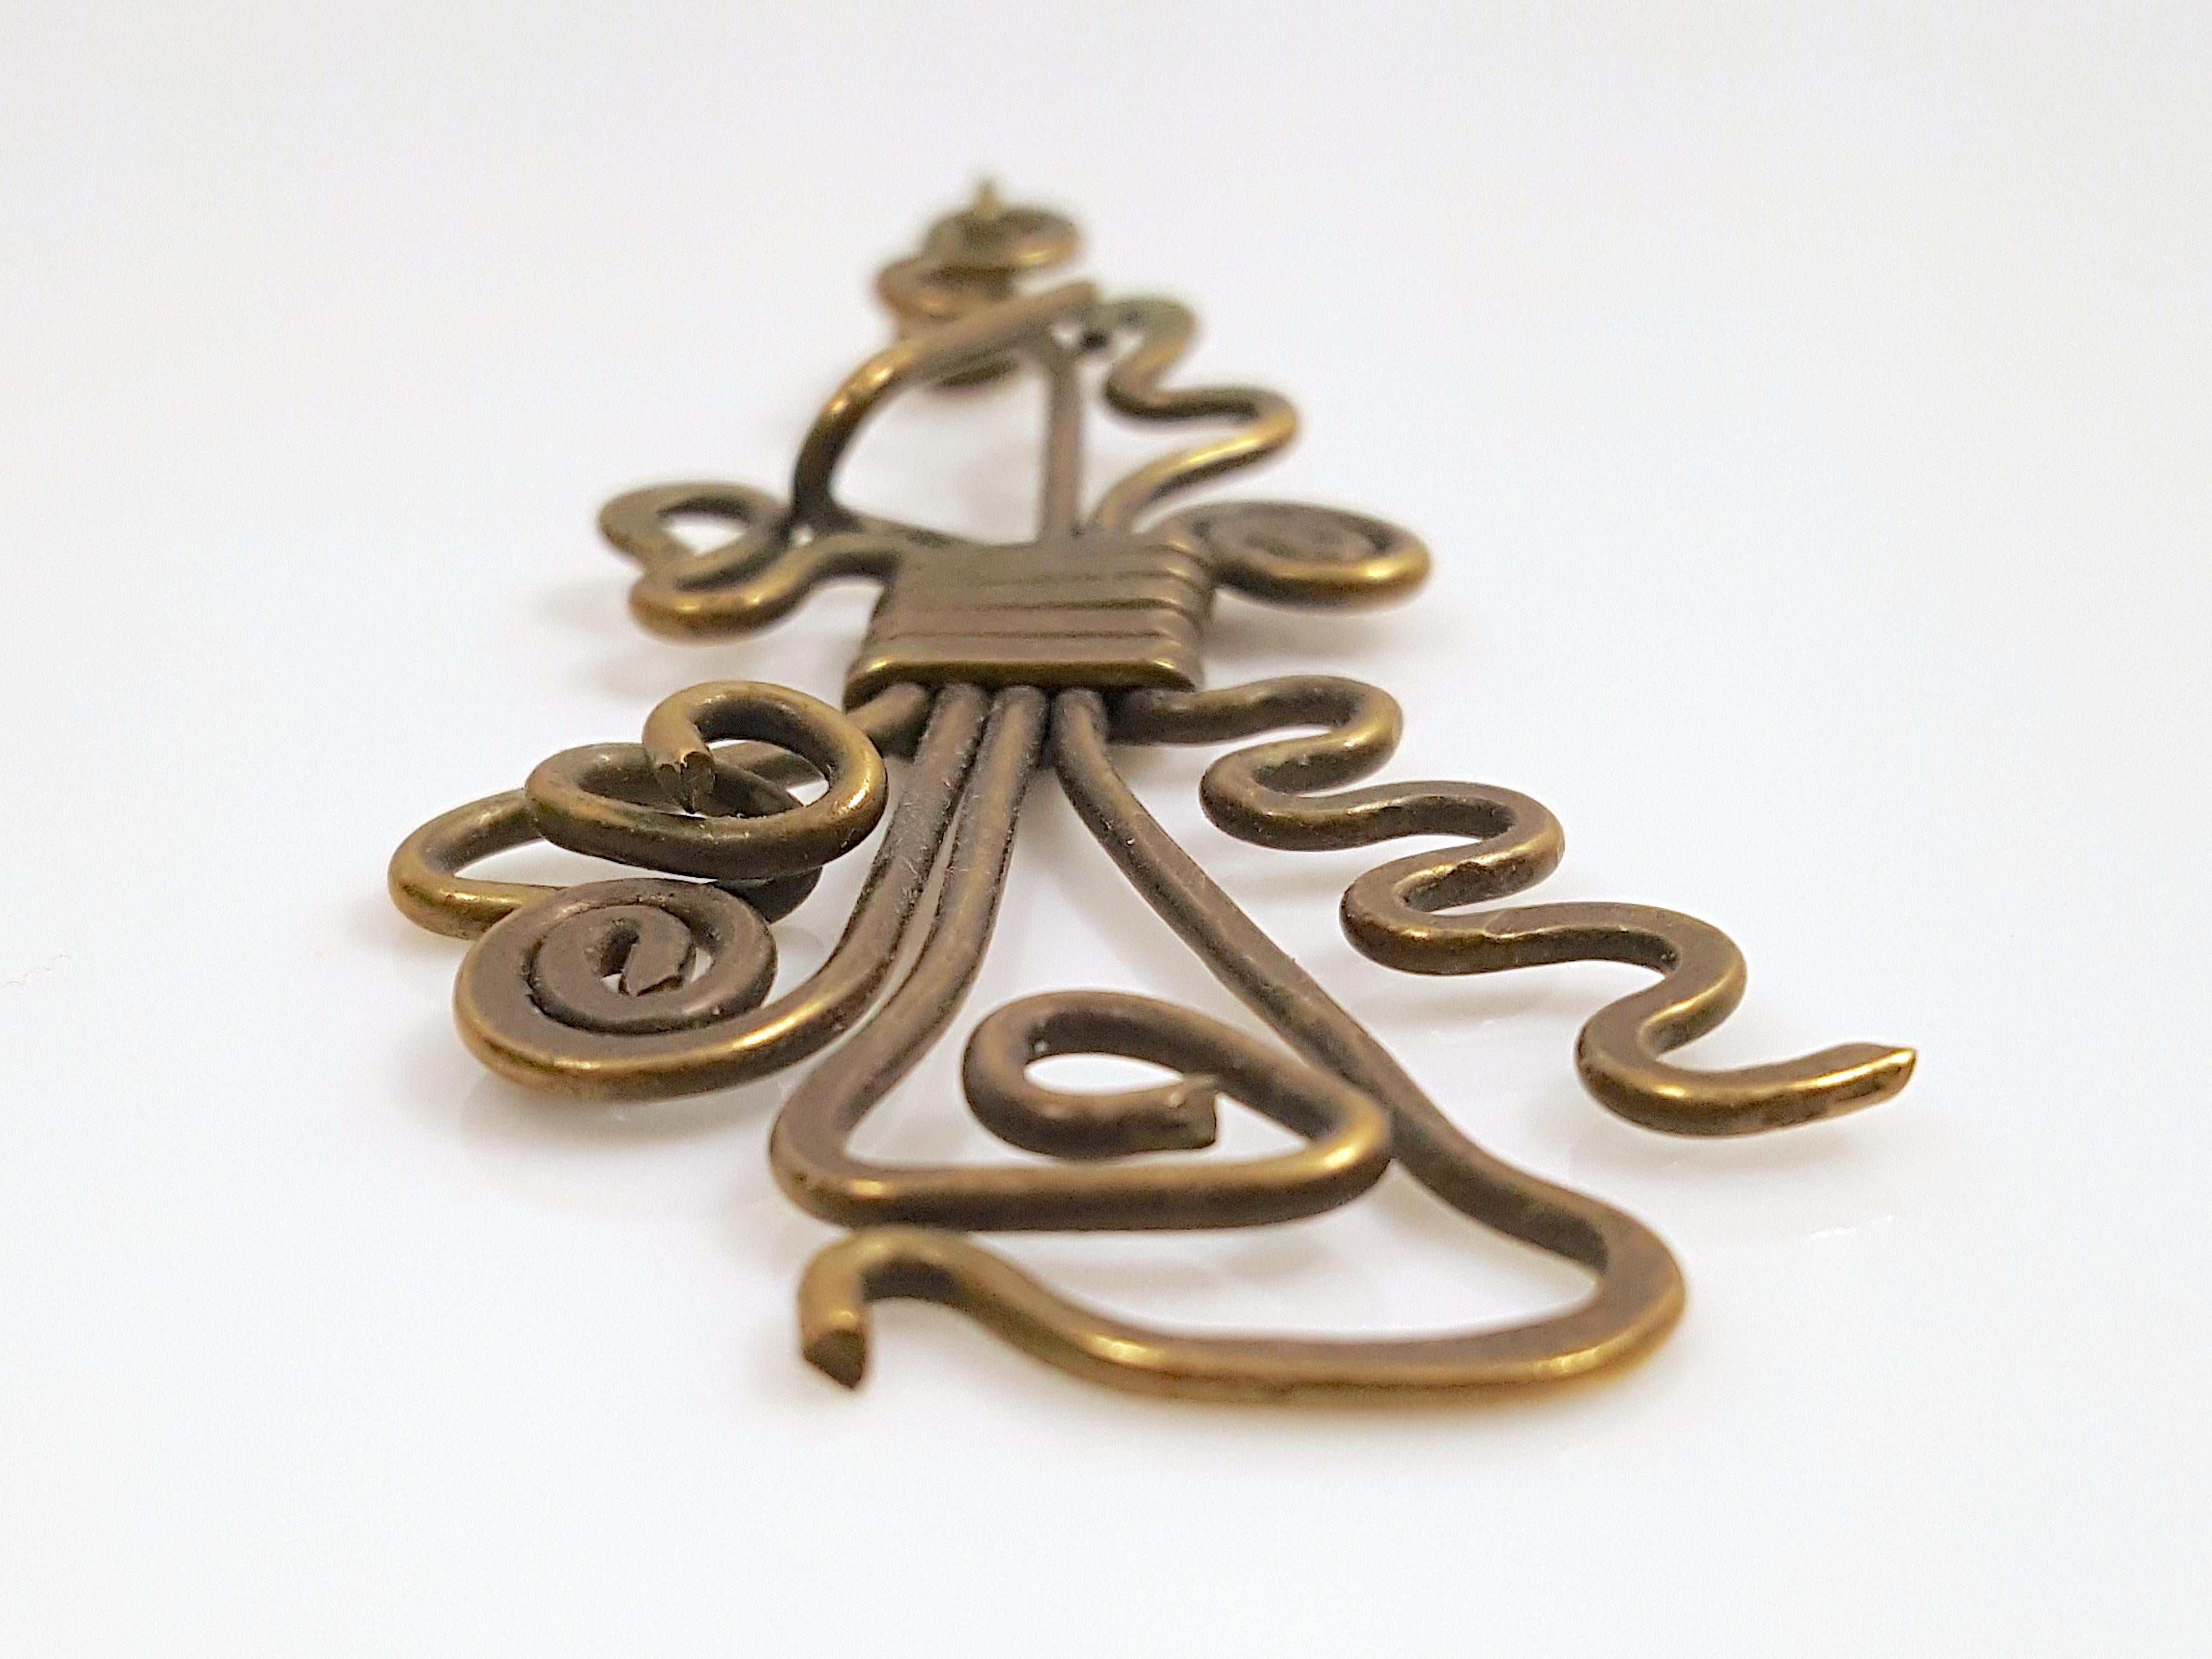 This vintage handcrafted brass-wire pendant was shaped and hammered into lively three-dimensional spirals, loops and squiggles with wrapped construction by an unknown 20th-Century studio artist judging from the lack of copyright/signature, modern